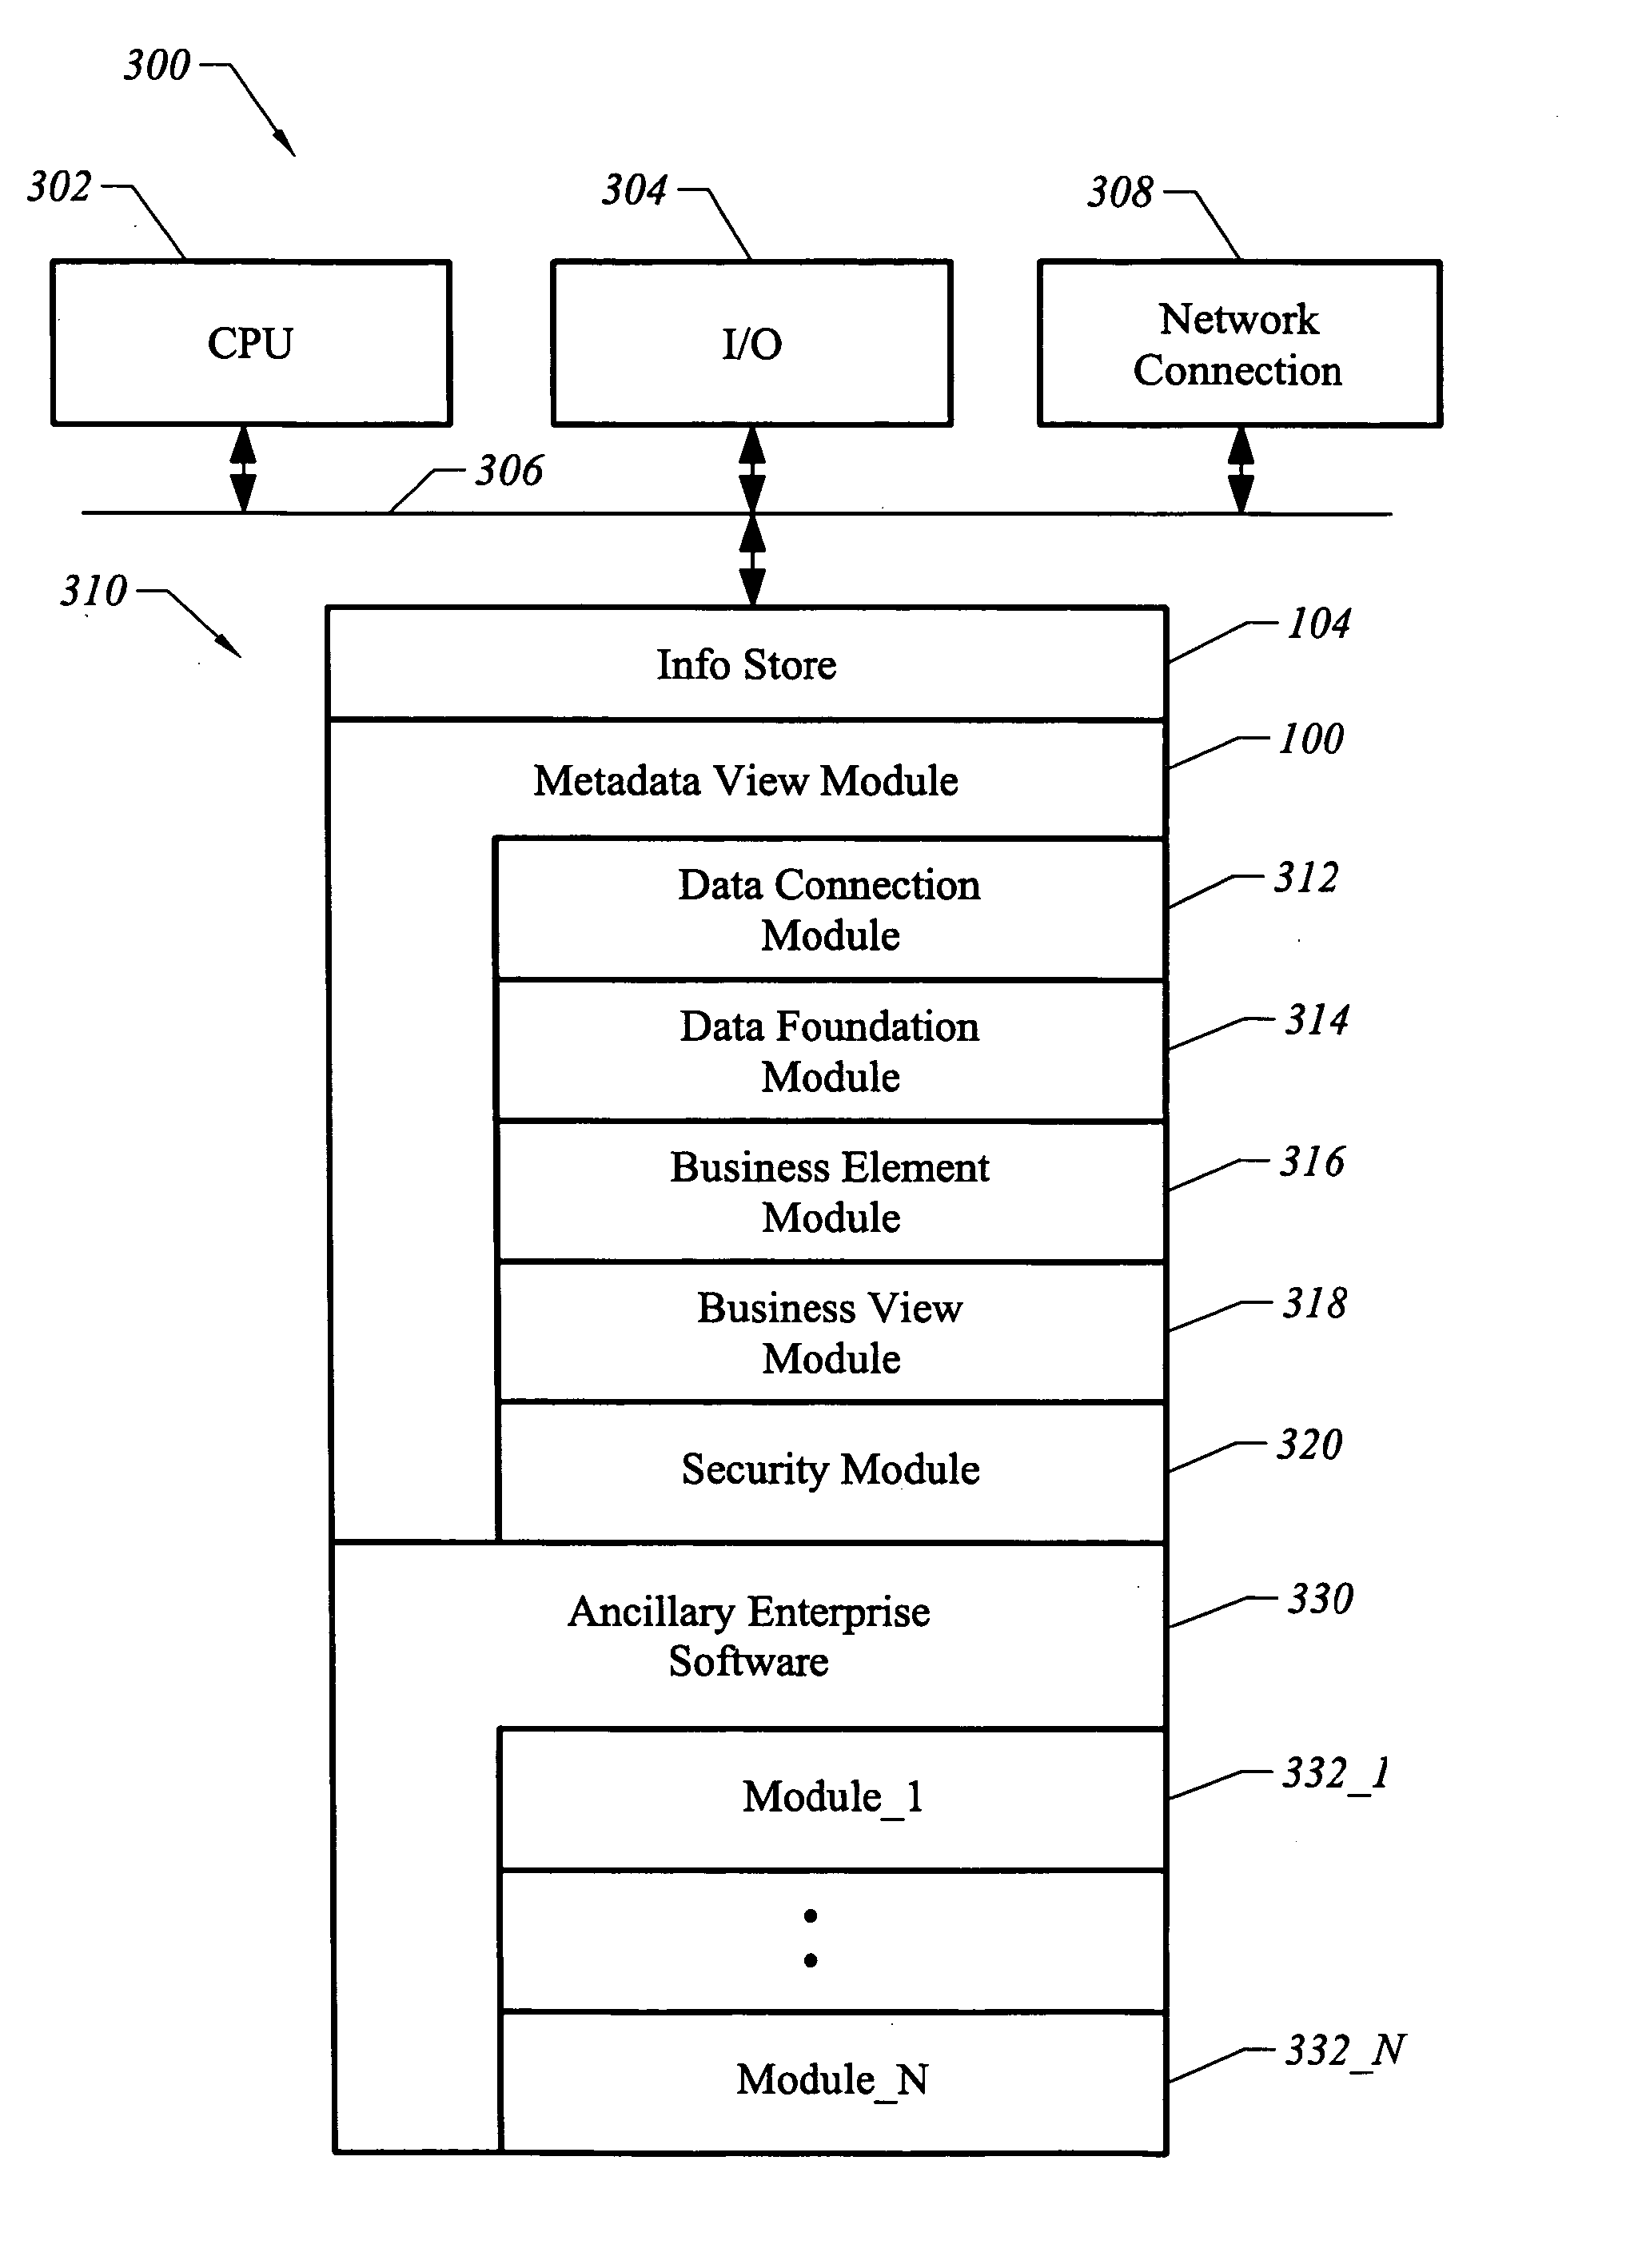 Apparatus and method for accessing diverse native data sources through a metadata interface